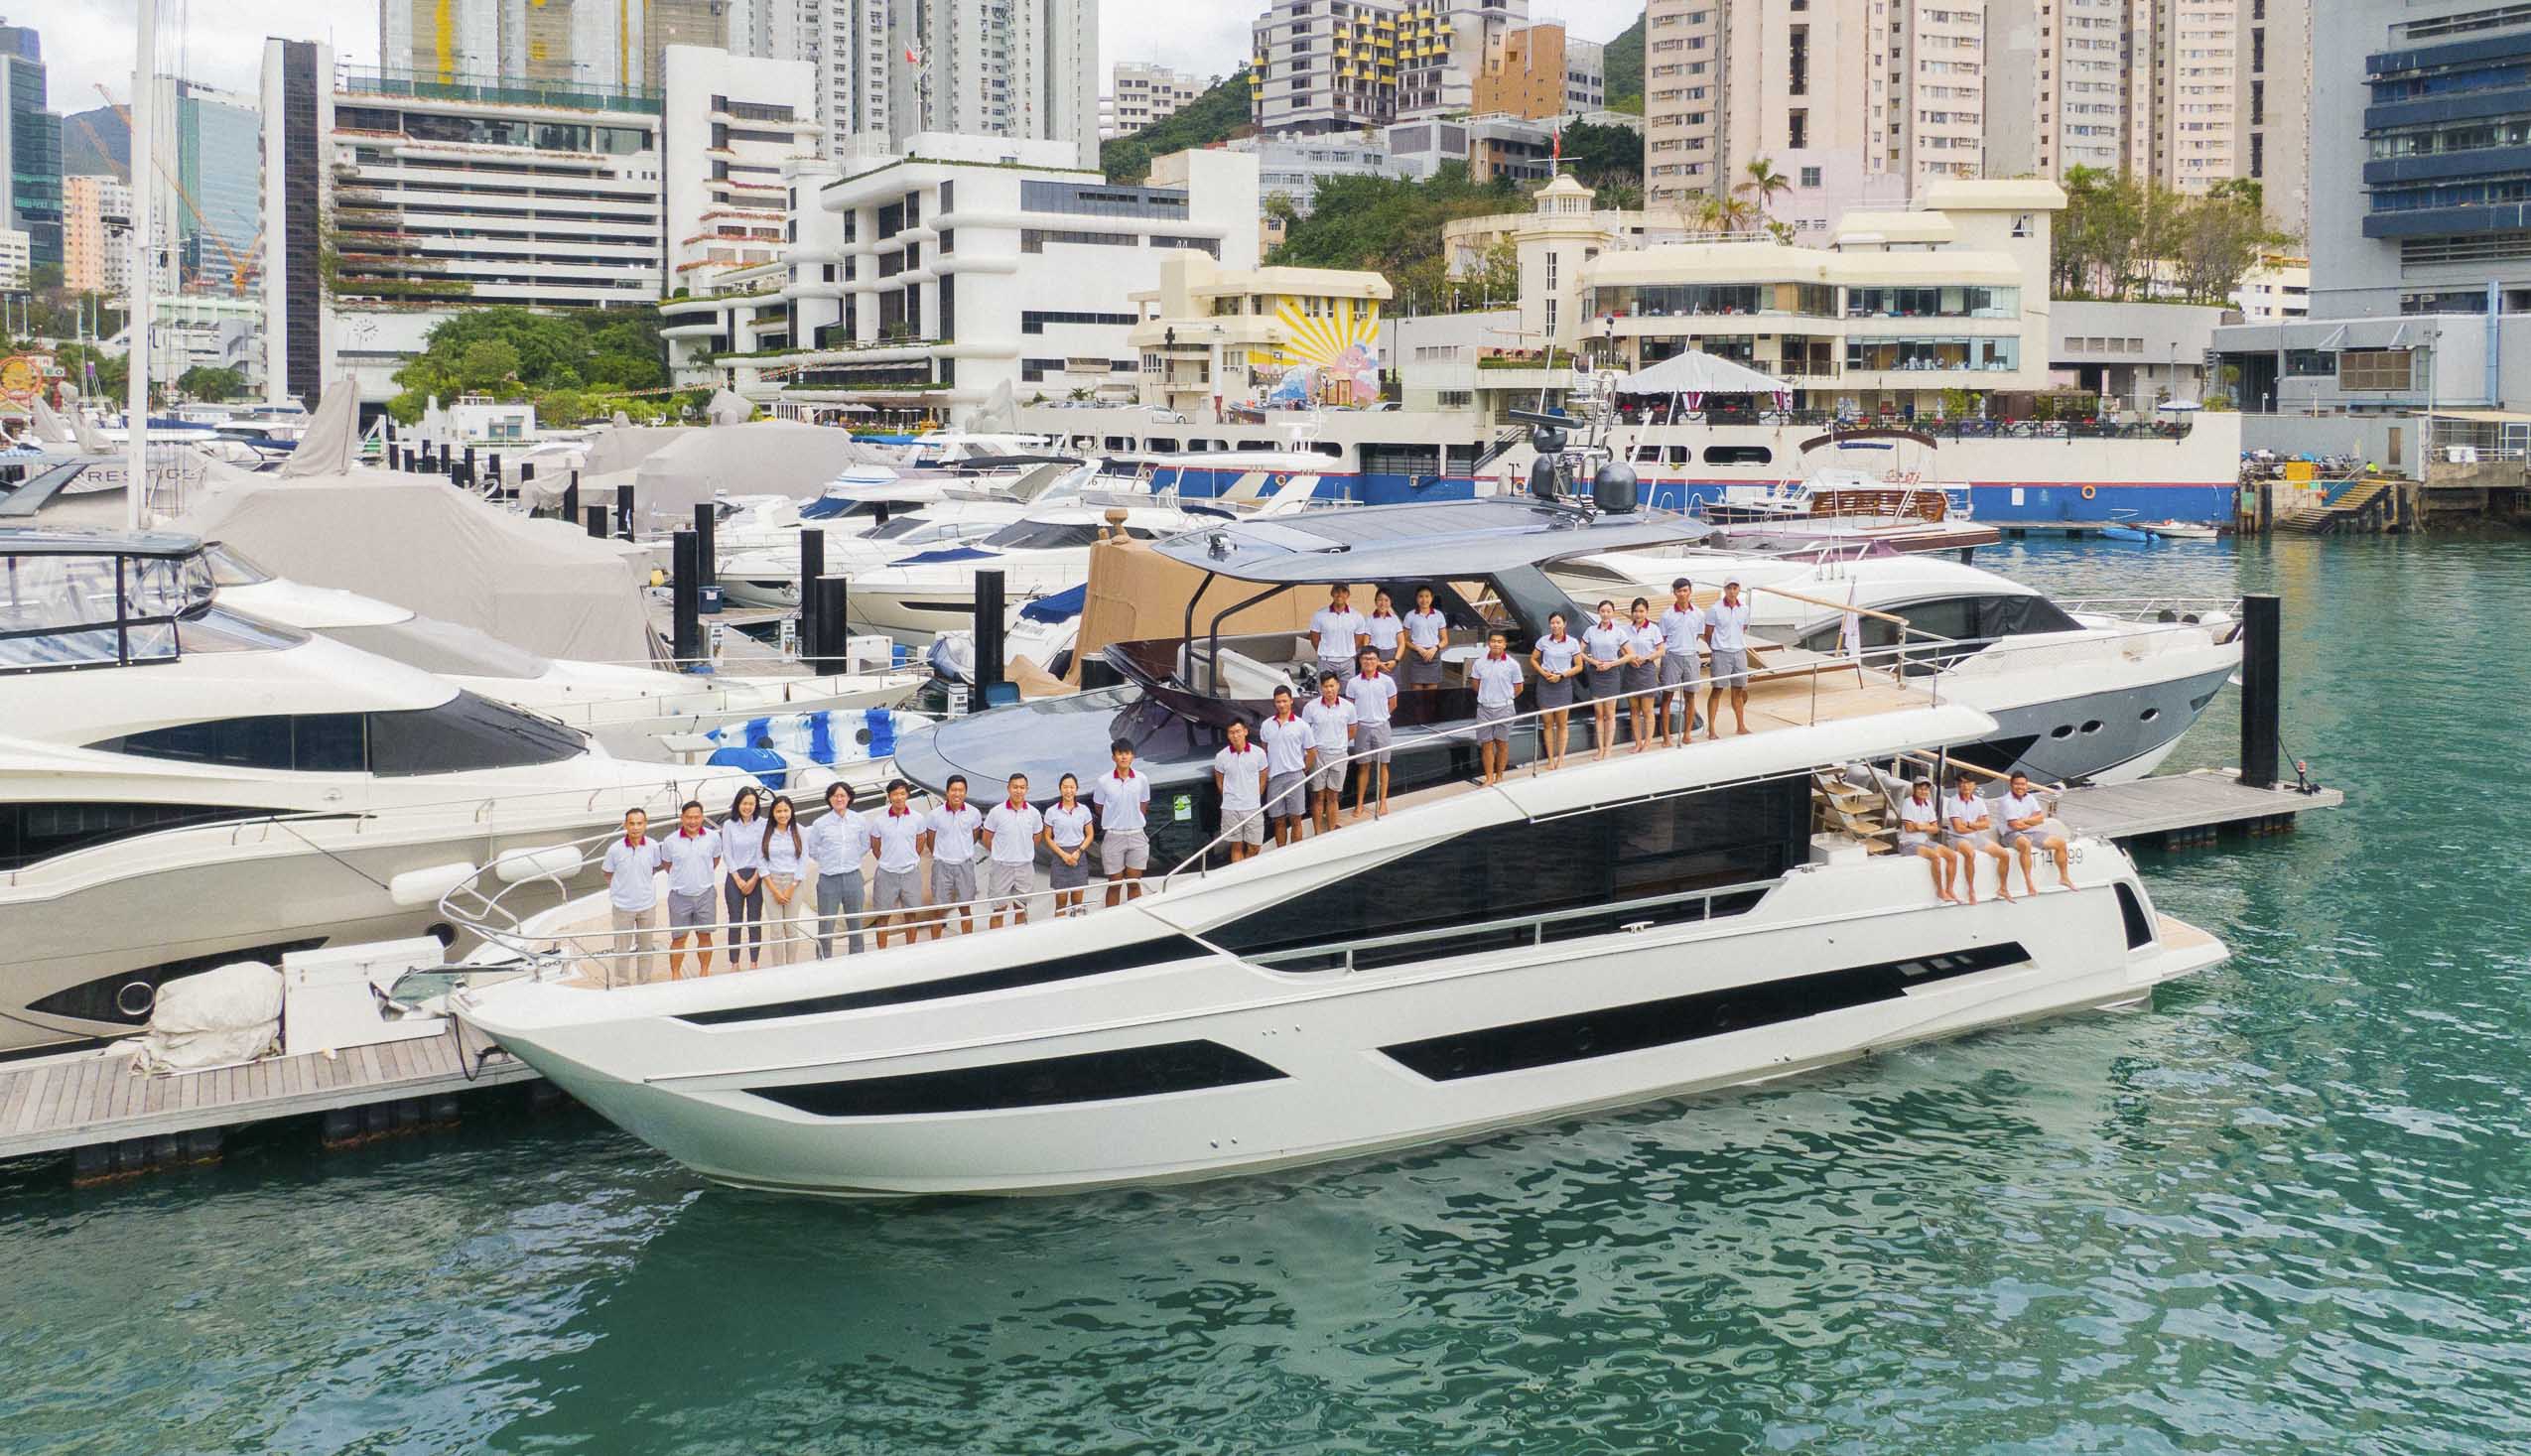 Founded in 2007, 9-87.com Asia Yachting is a luxury yacht dealership, brokerage, and yachting services company based in Hong Kong with a presence throughout Asia.